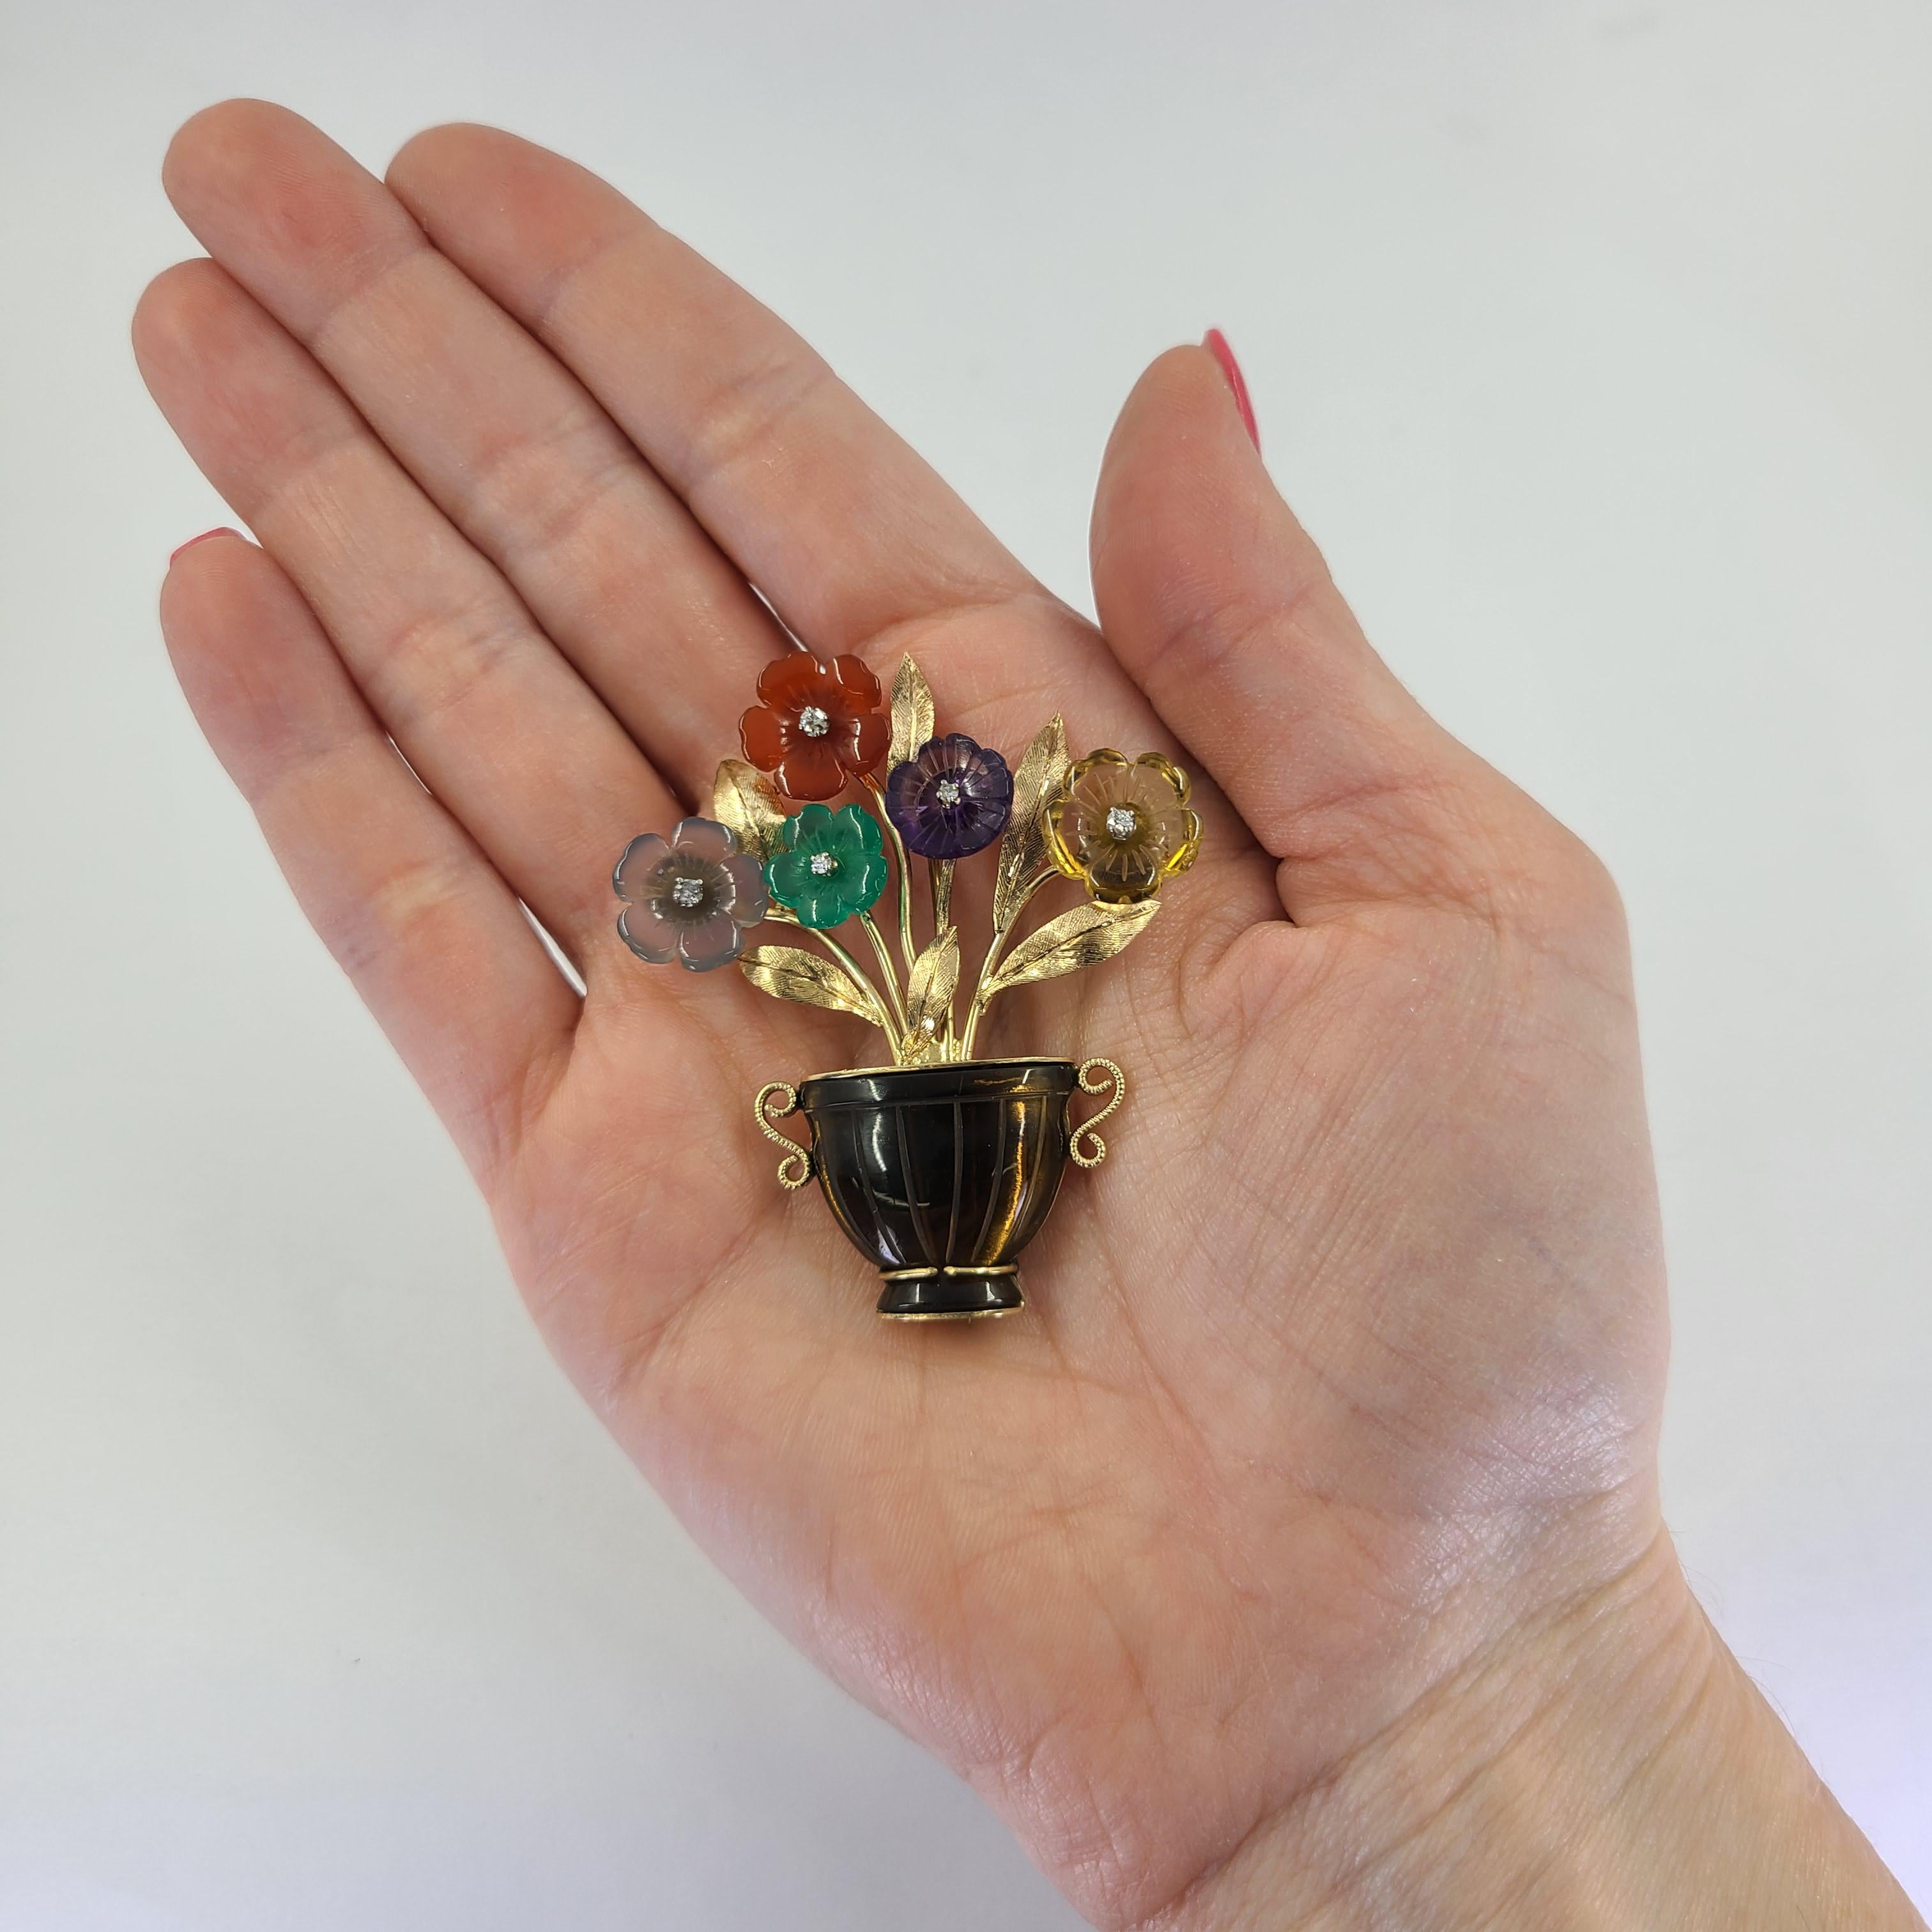 14 Karat Yellow Gold Flower Pot Brooch Featuring Spinning Carved Citrine, Amethyst, Chalcedony, Smokey Quartz, & Carnelian Accented By 5 Round Diamonds. 2.13 Inch Length. Finished Weight Is 13.9 Grams.